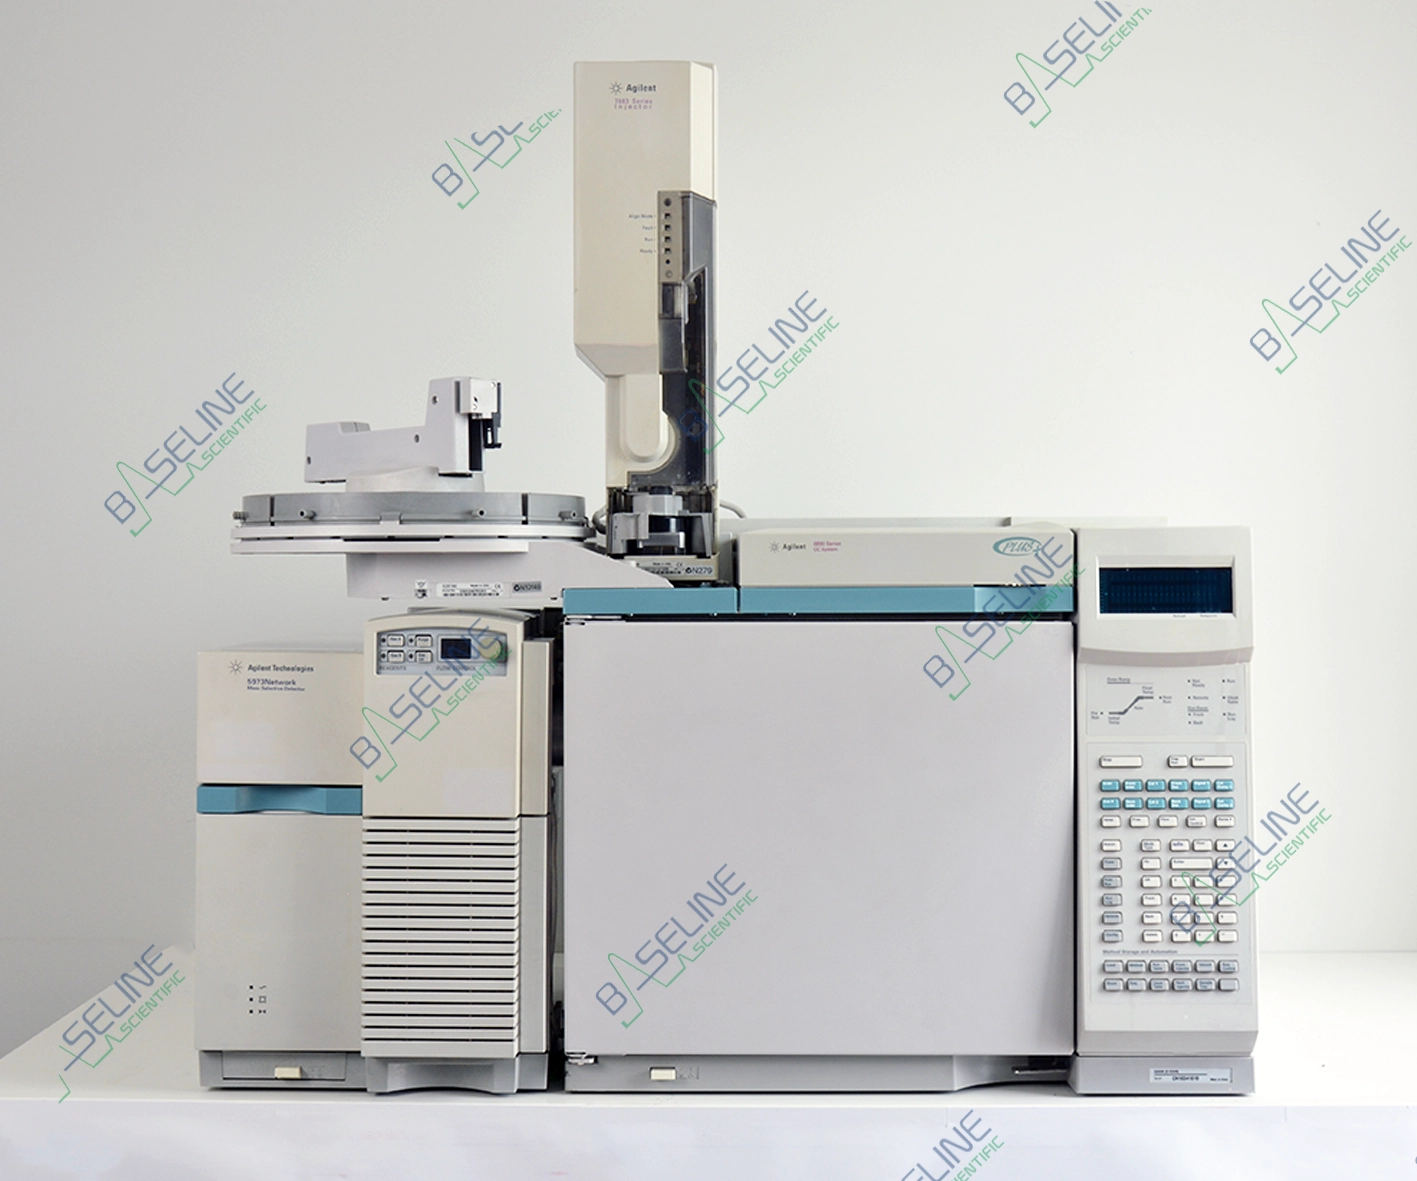 Refurbished Agilent 6890 GC with 5973A MSD Diffusion Pump and 7683 Autosampler